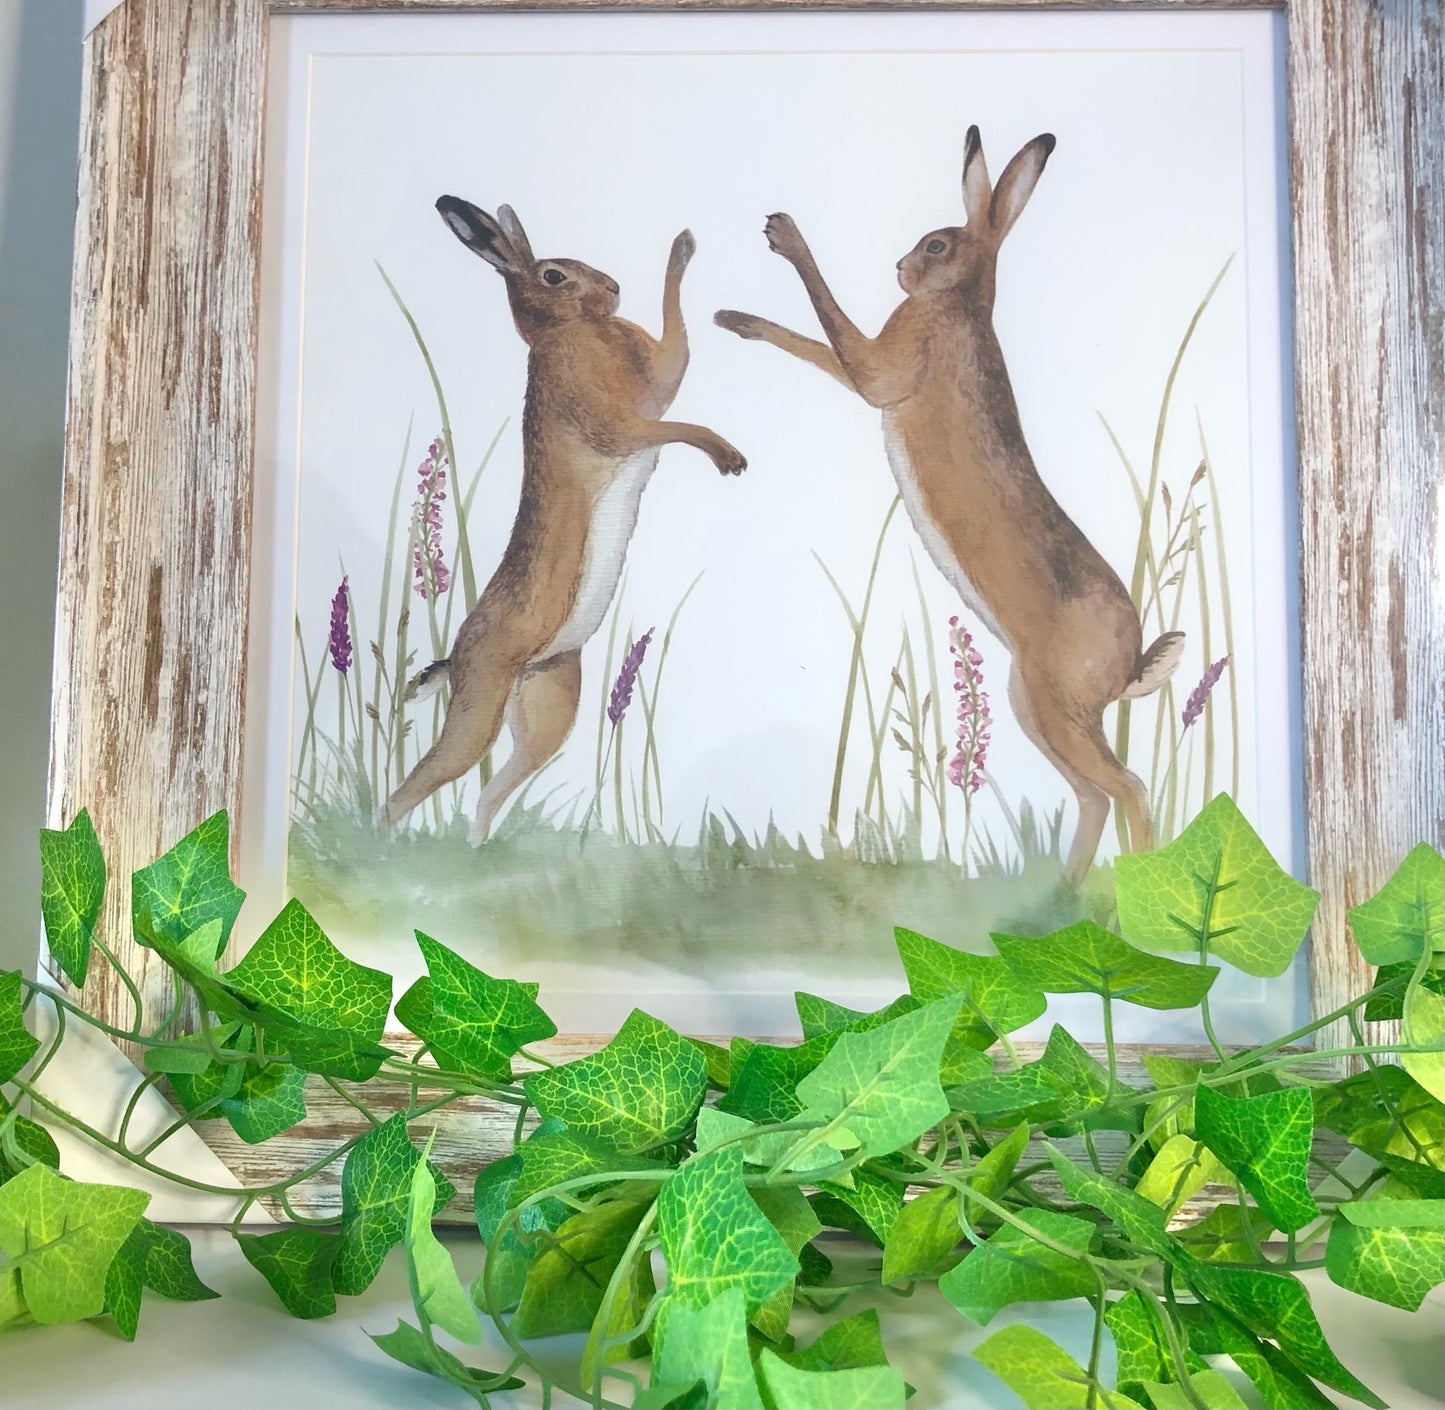 Hare Picture | Framed Picture of Hares | Boxing Hares